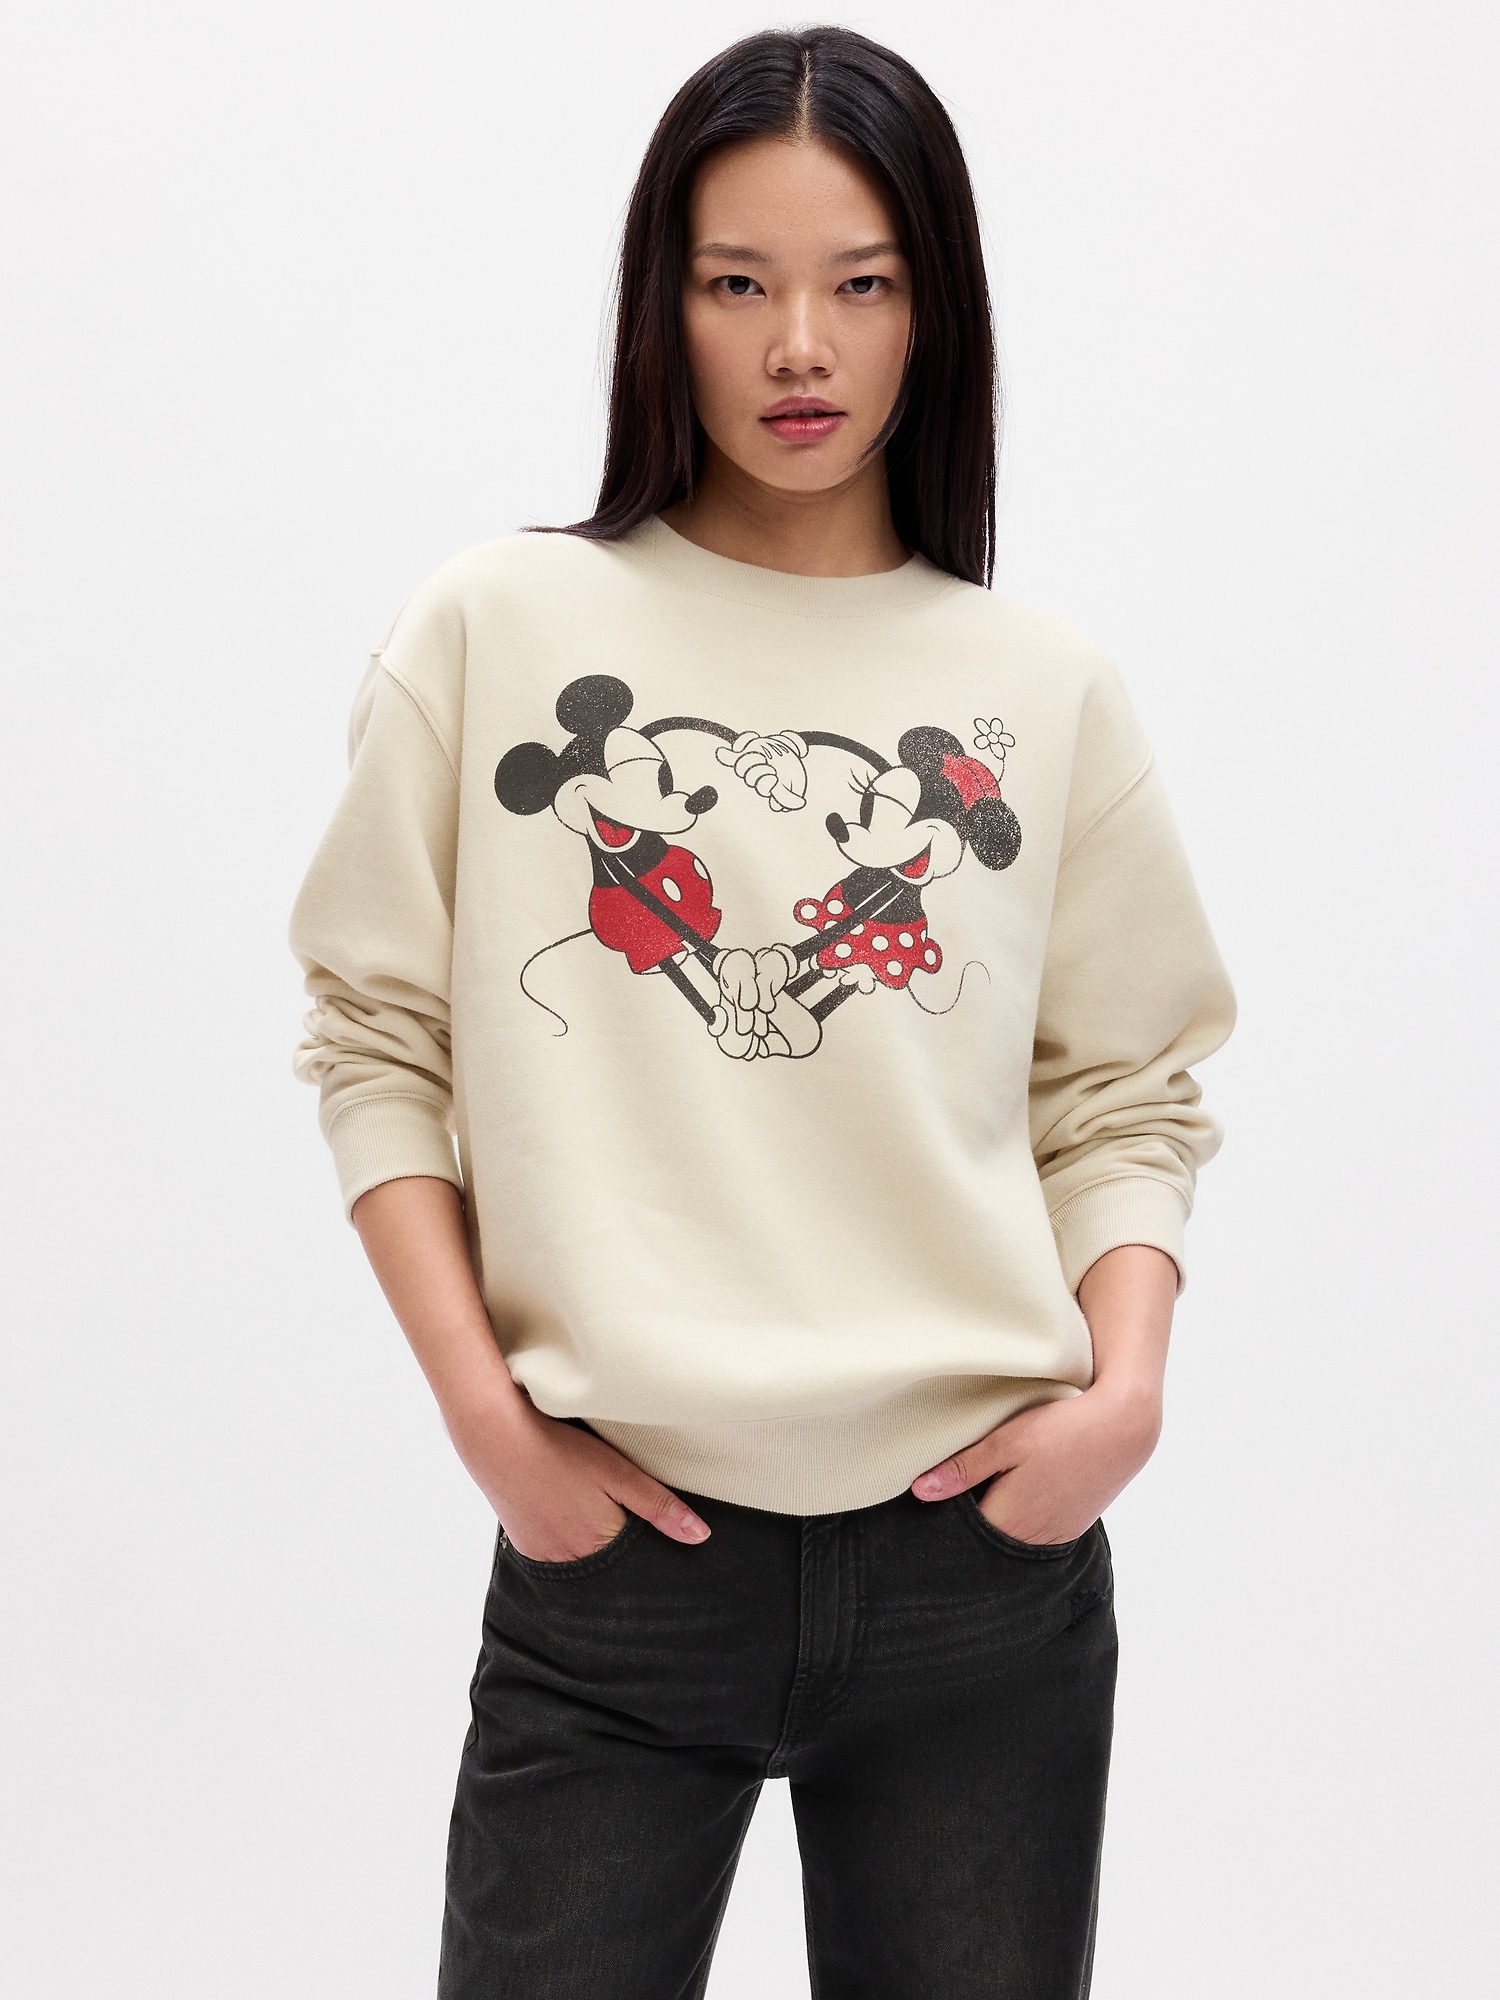 Shop Women MICKYMOUSE Disney Relaxed Graphic Sweatshirt - XL - 174 AED in  UAE, Dubai